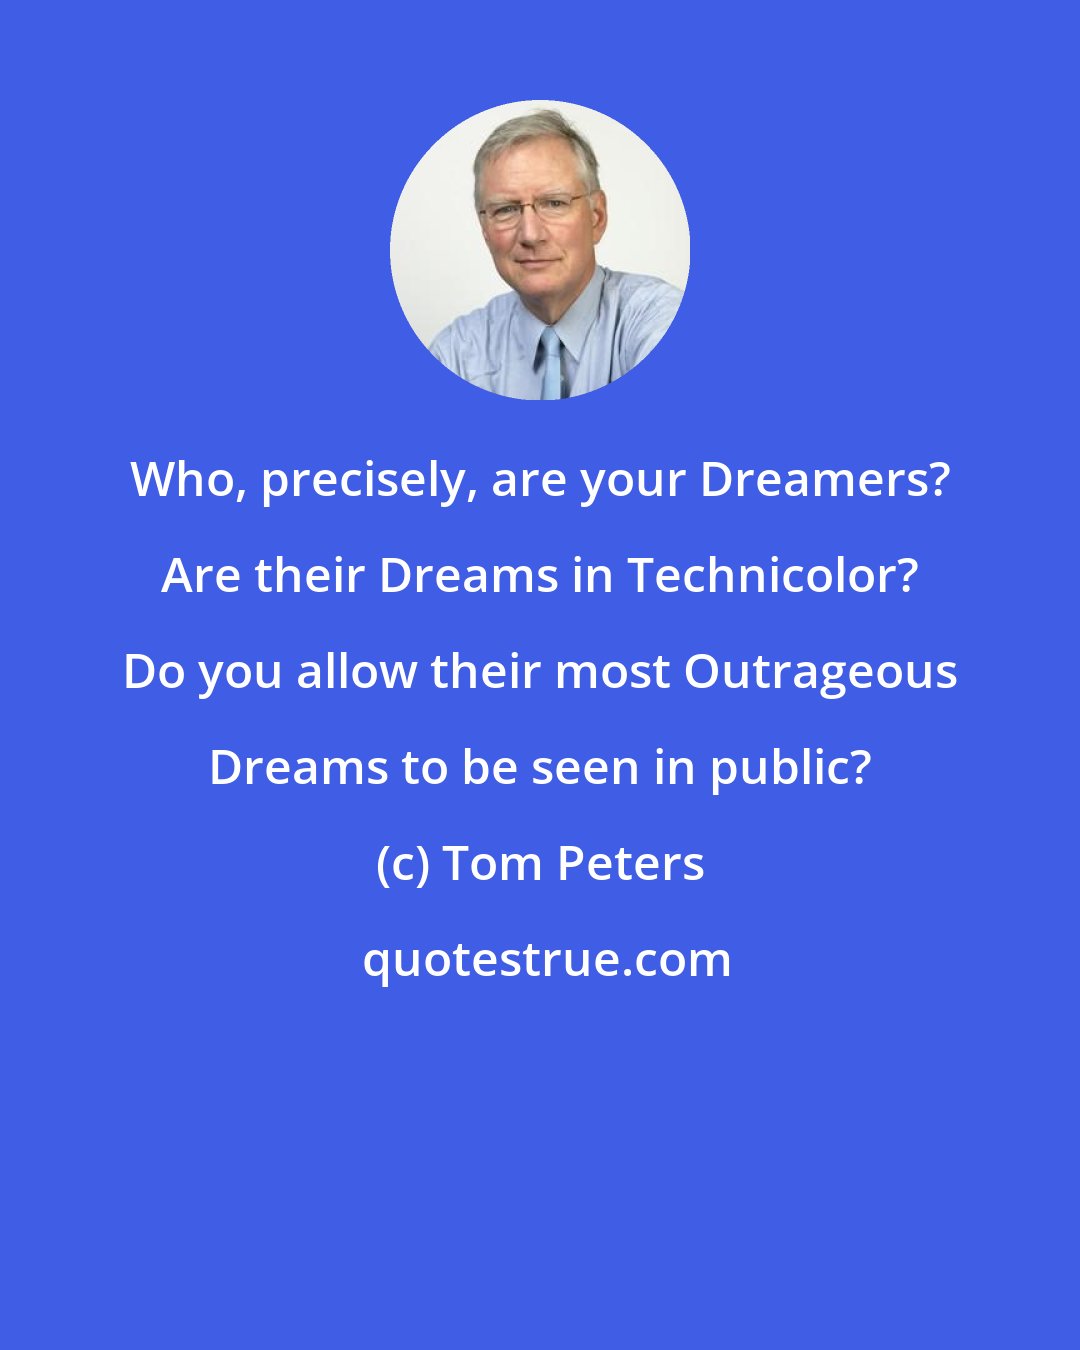 Tom Peters: Who, precisely, are your Dreamers? Are their Dreams in Technicolor? Do you allow their most Outrageous Dreams to be seen in public?